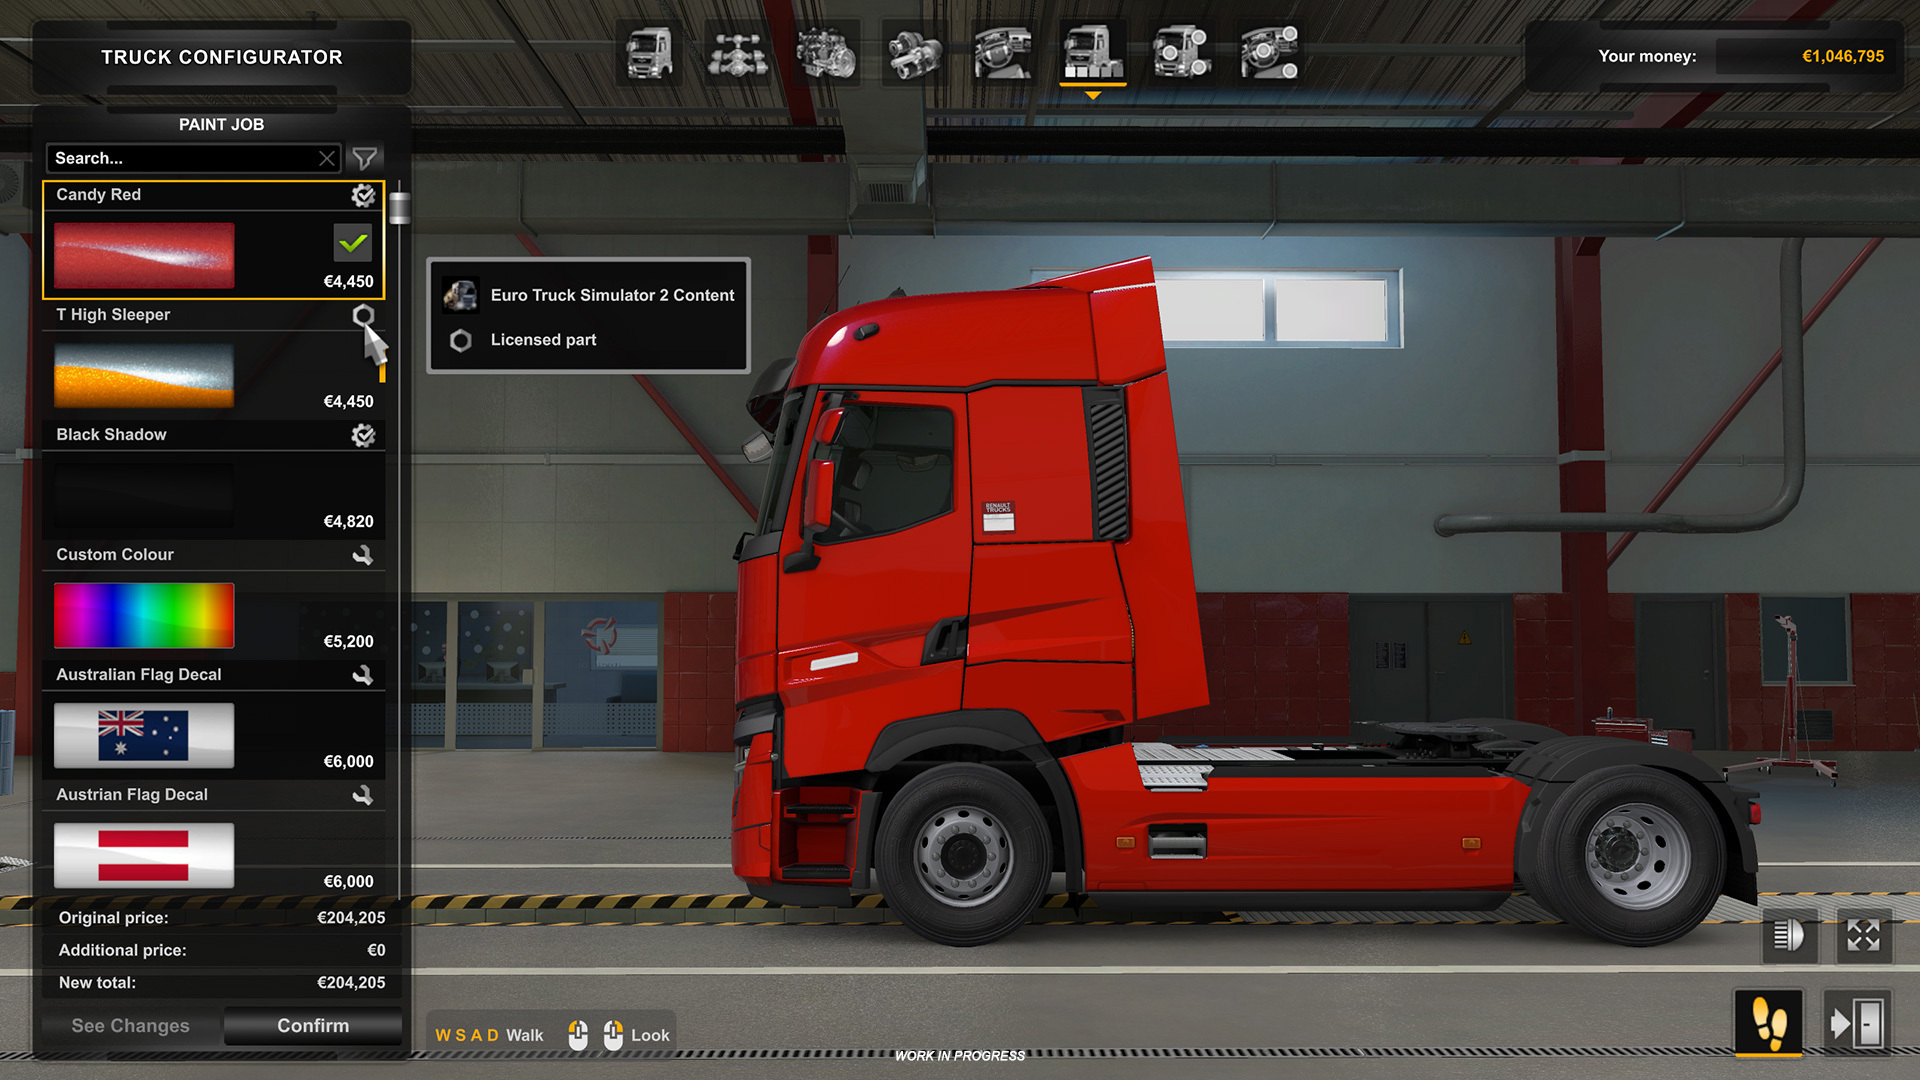 ETS2/ATS Coming To Steam Deck, A New Hand-Held Gaming PC